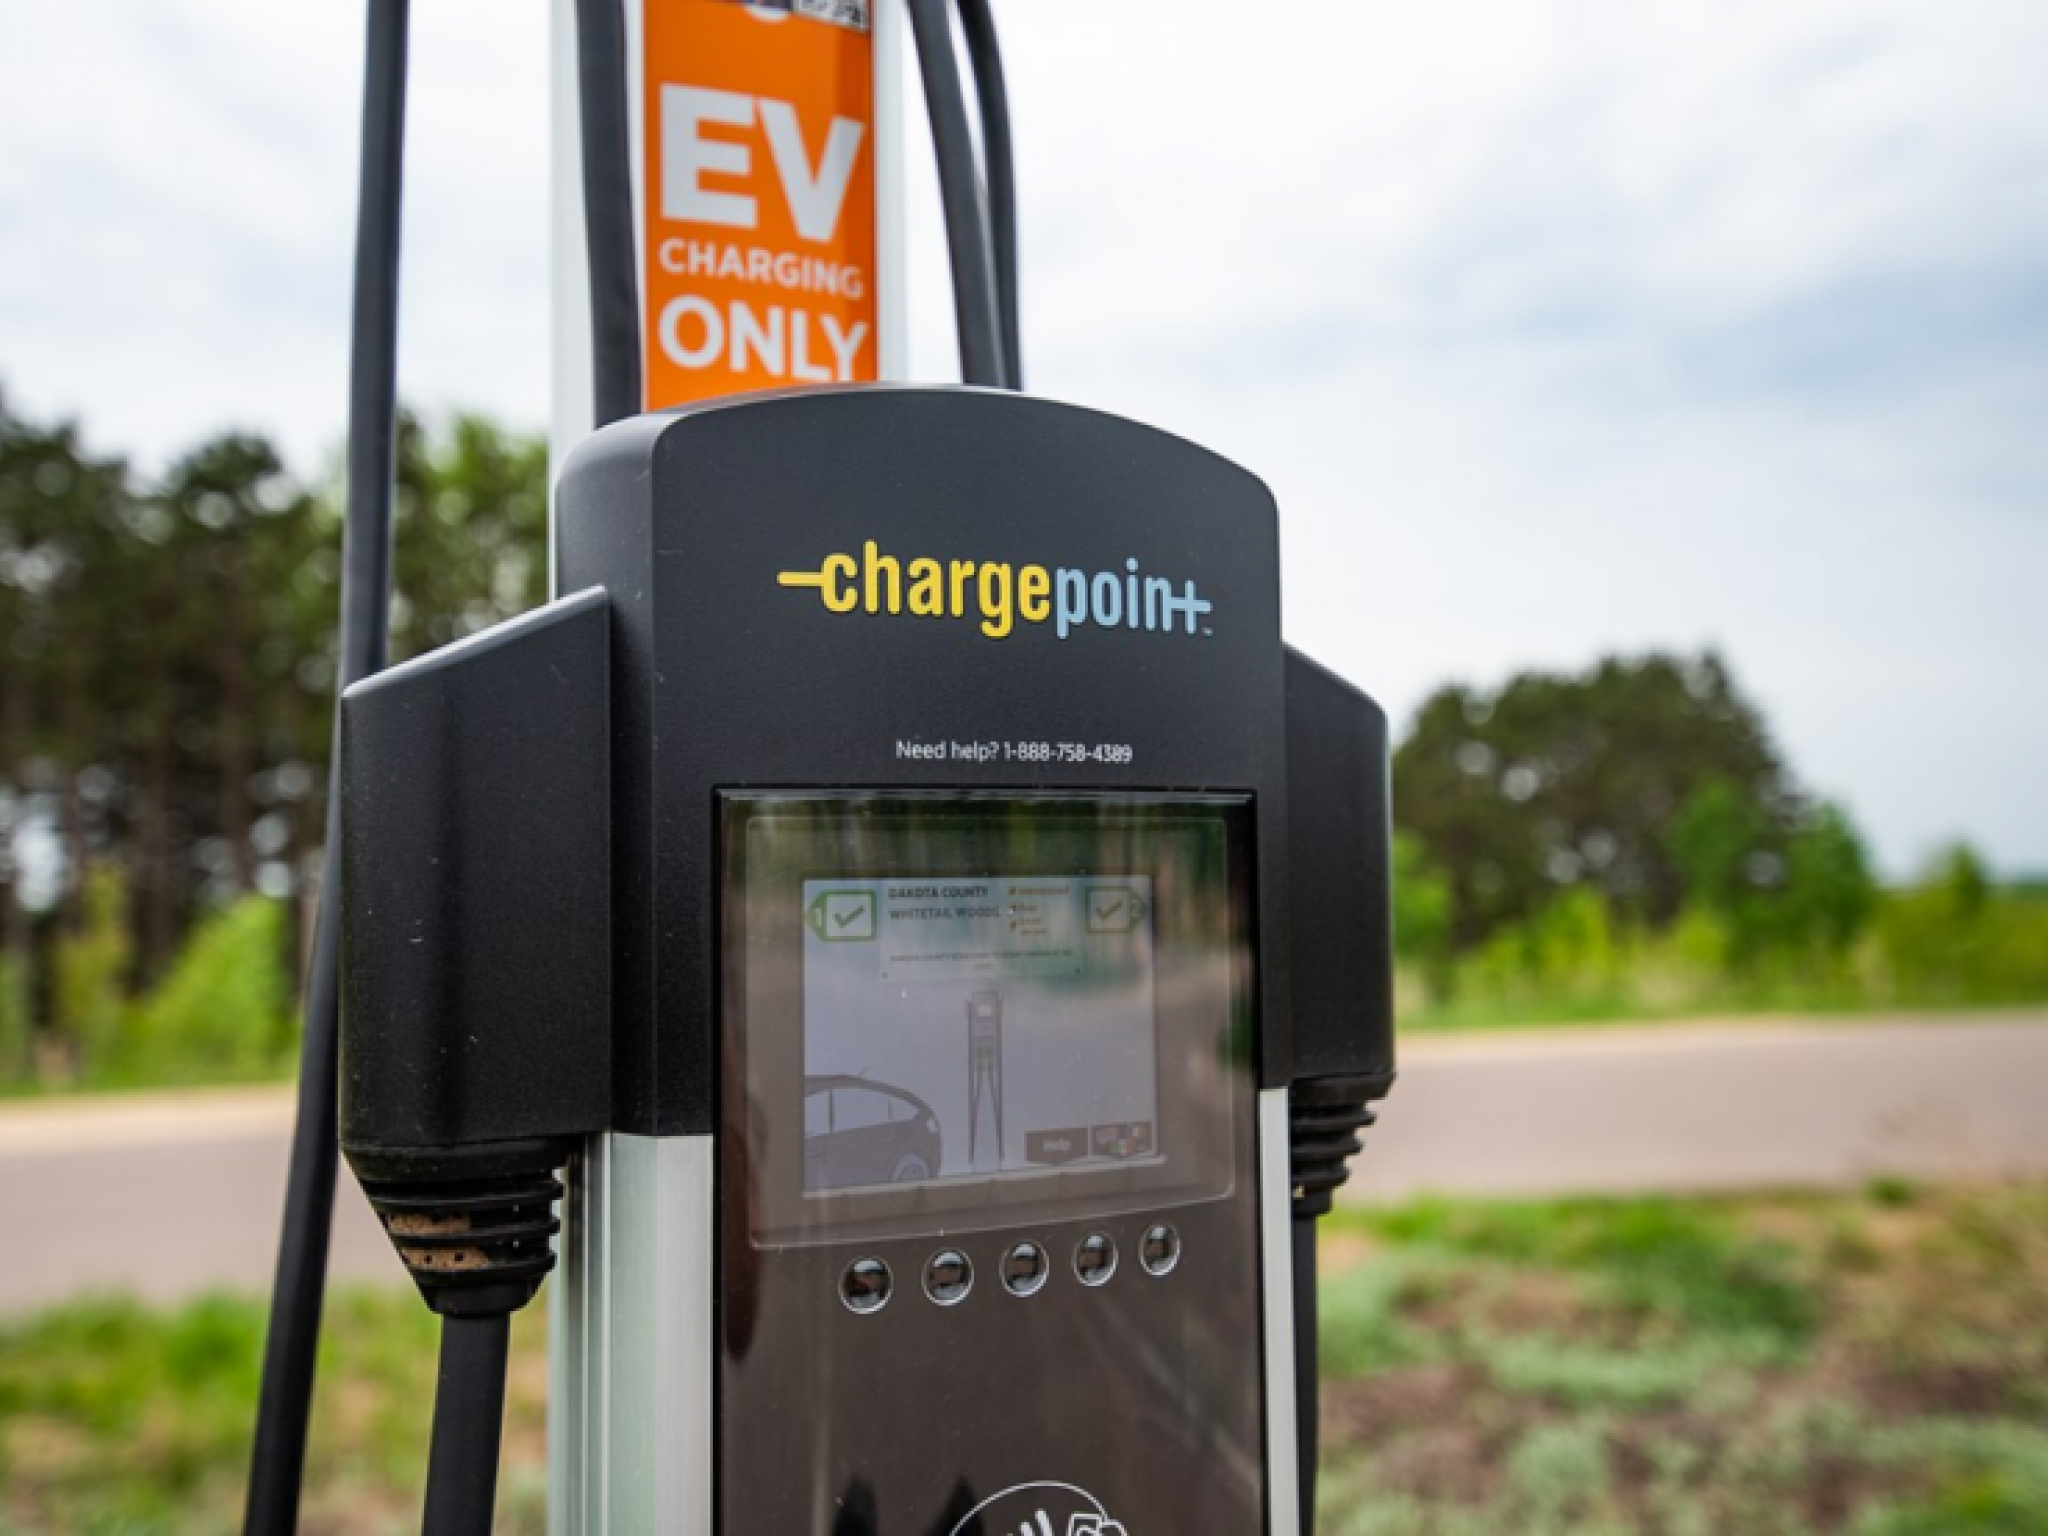  whats-going-on-with-chargepoint-stock-after-collaborating-with-airbnb 